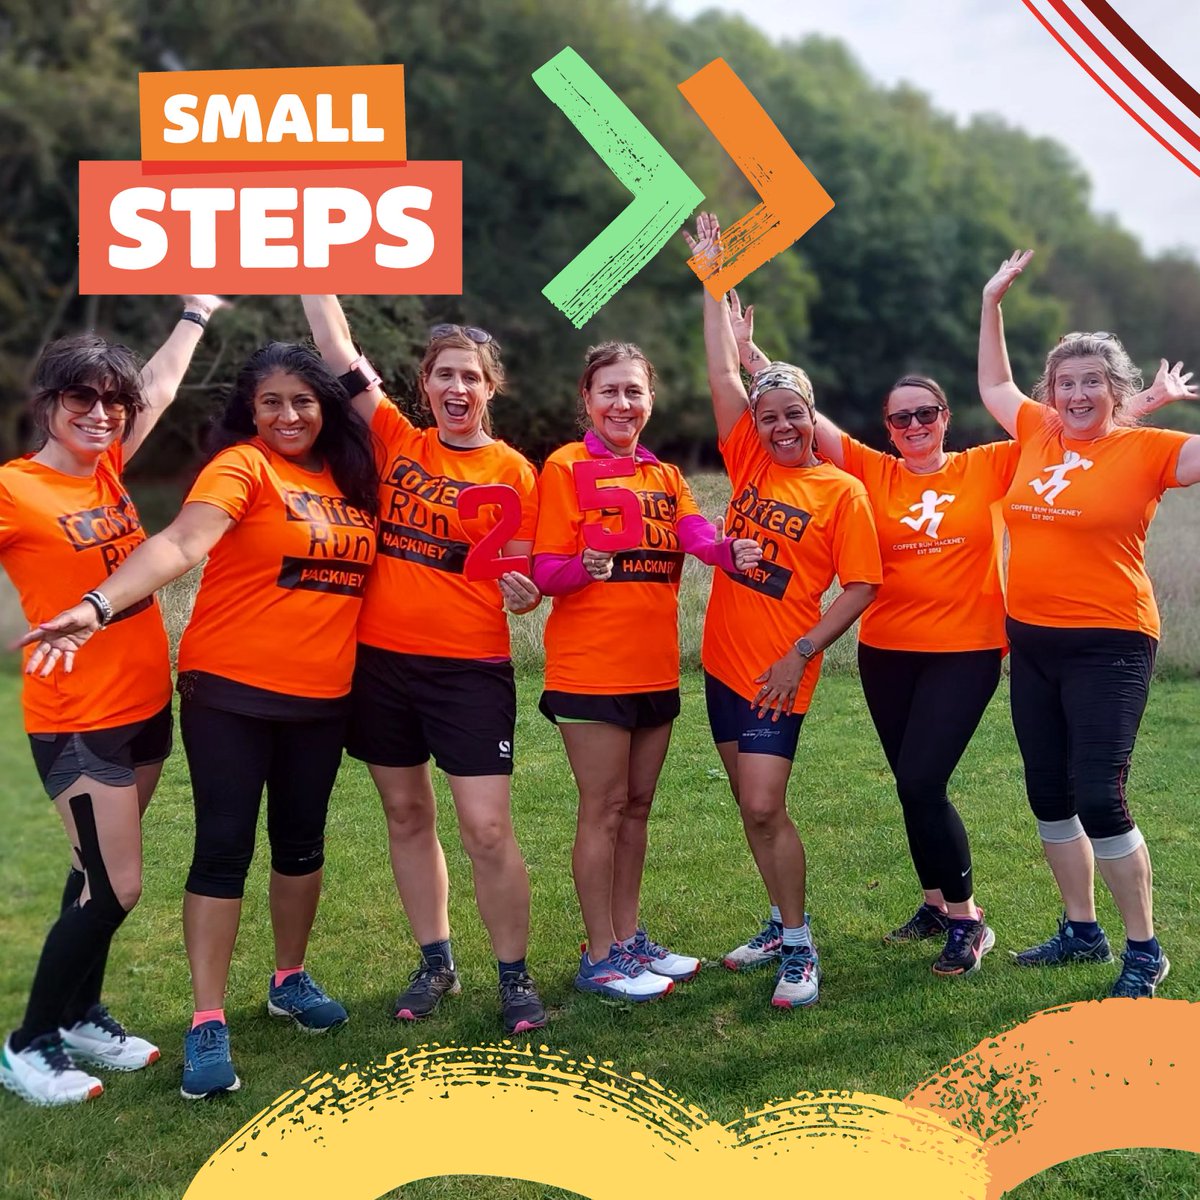 As part of our #SmallSteps campaign we’re working with local groups to help residents get more active. Find out more about Coffee Run who are starting their first running club of 2024 in 2 weeks. Read more on page 16 in the latest Love Hackney magazine: orlo.uk/OHYfH